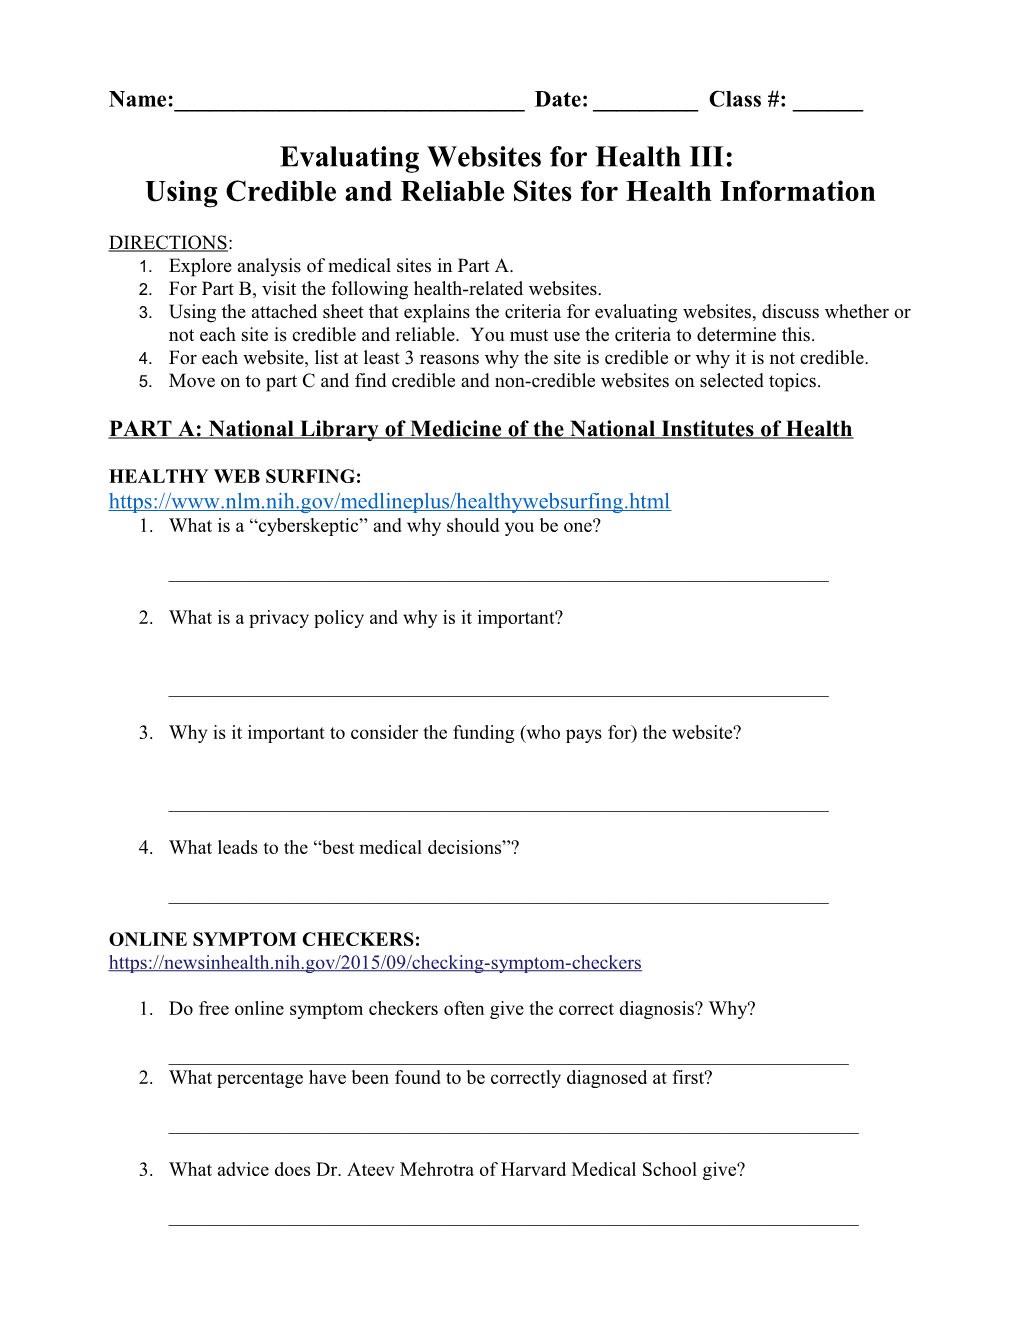 Using Credible and Reliable Sites for Health Information